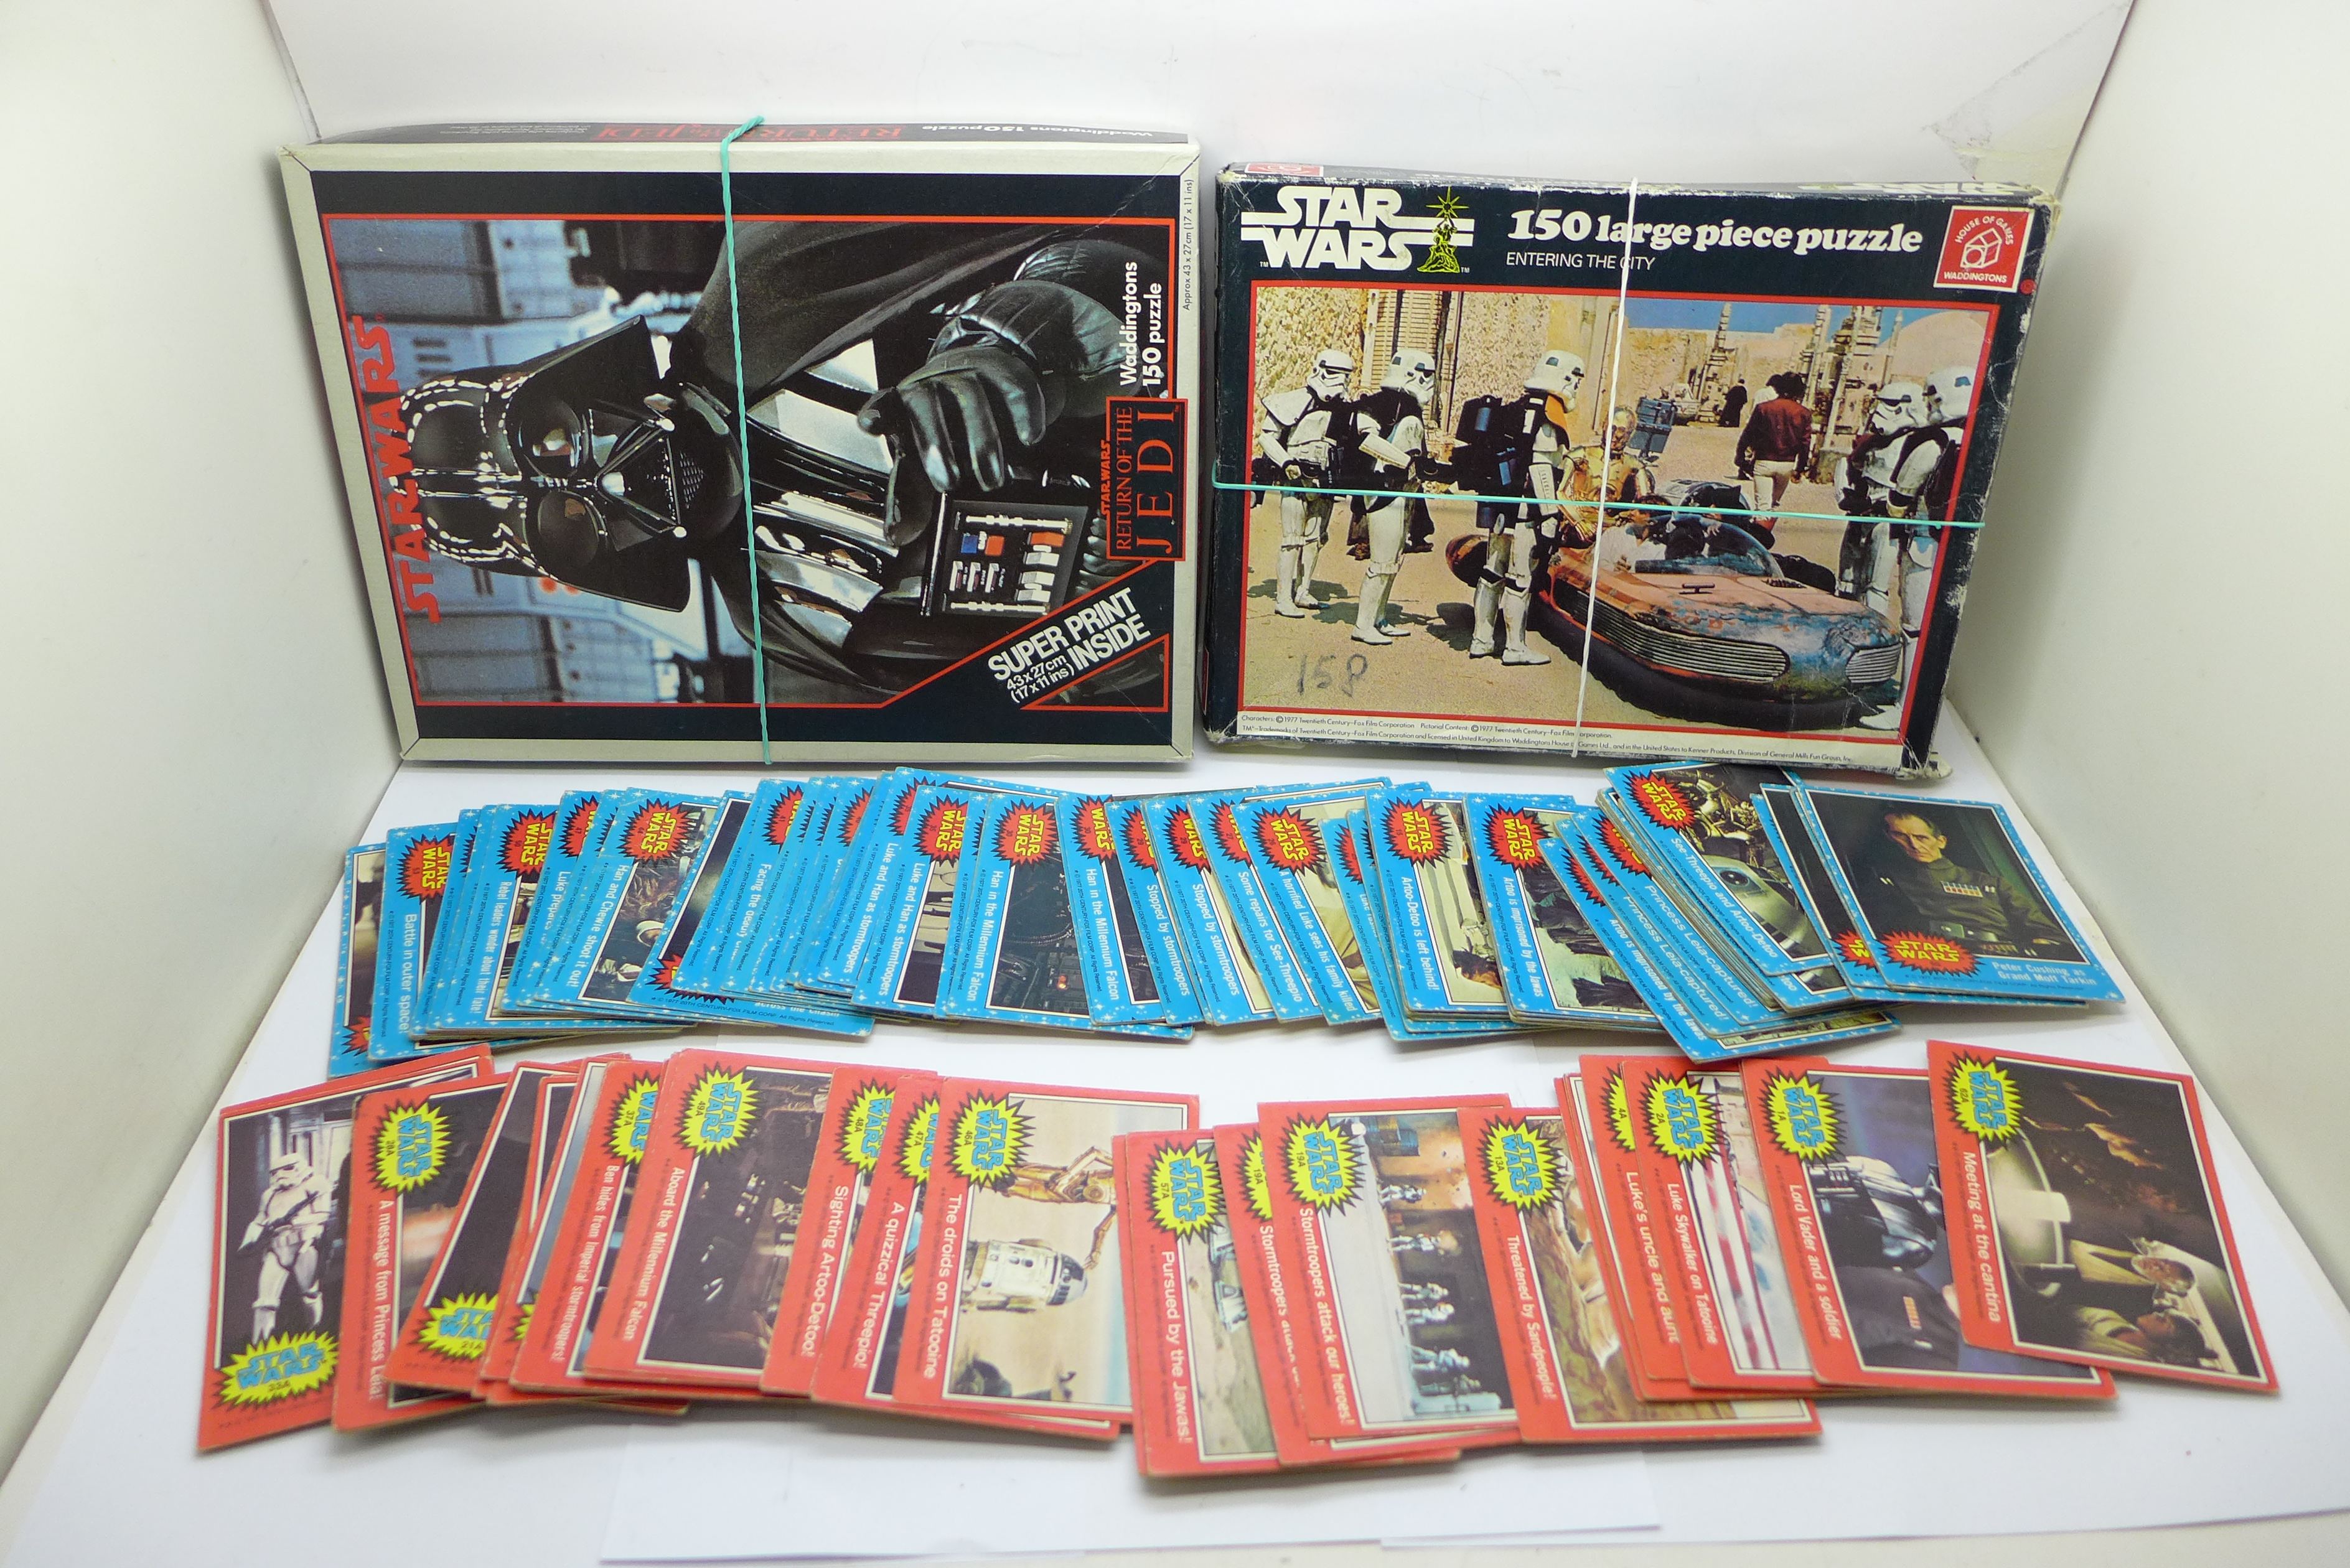 Two Star Wars themed jigsaw puzzles and various 1977 picture cards